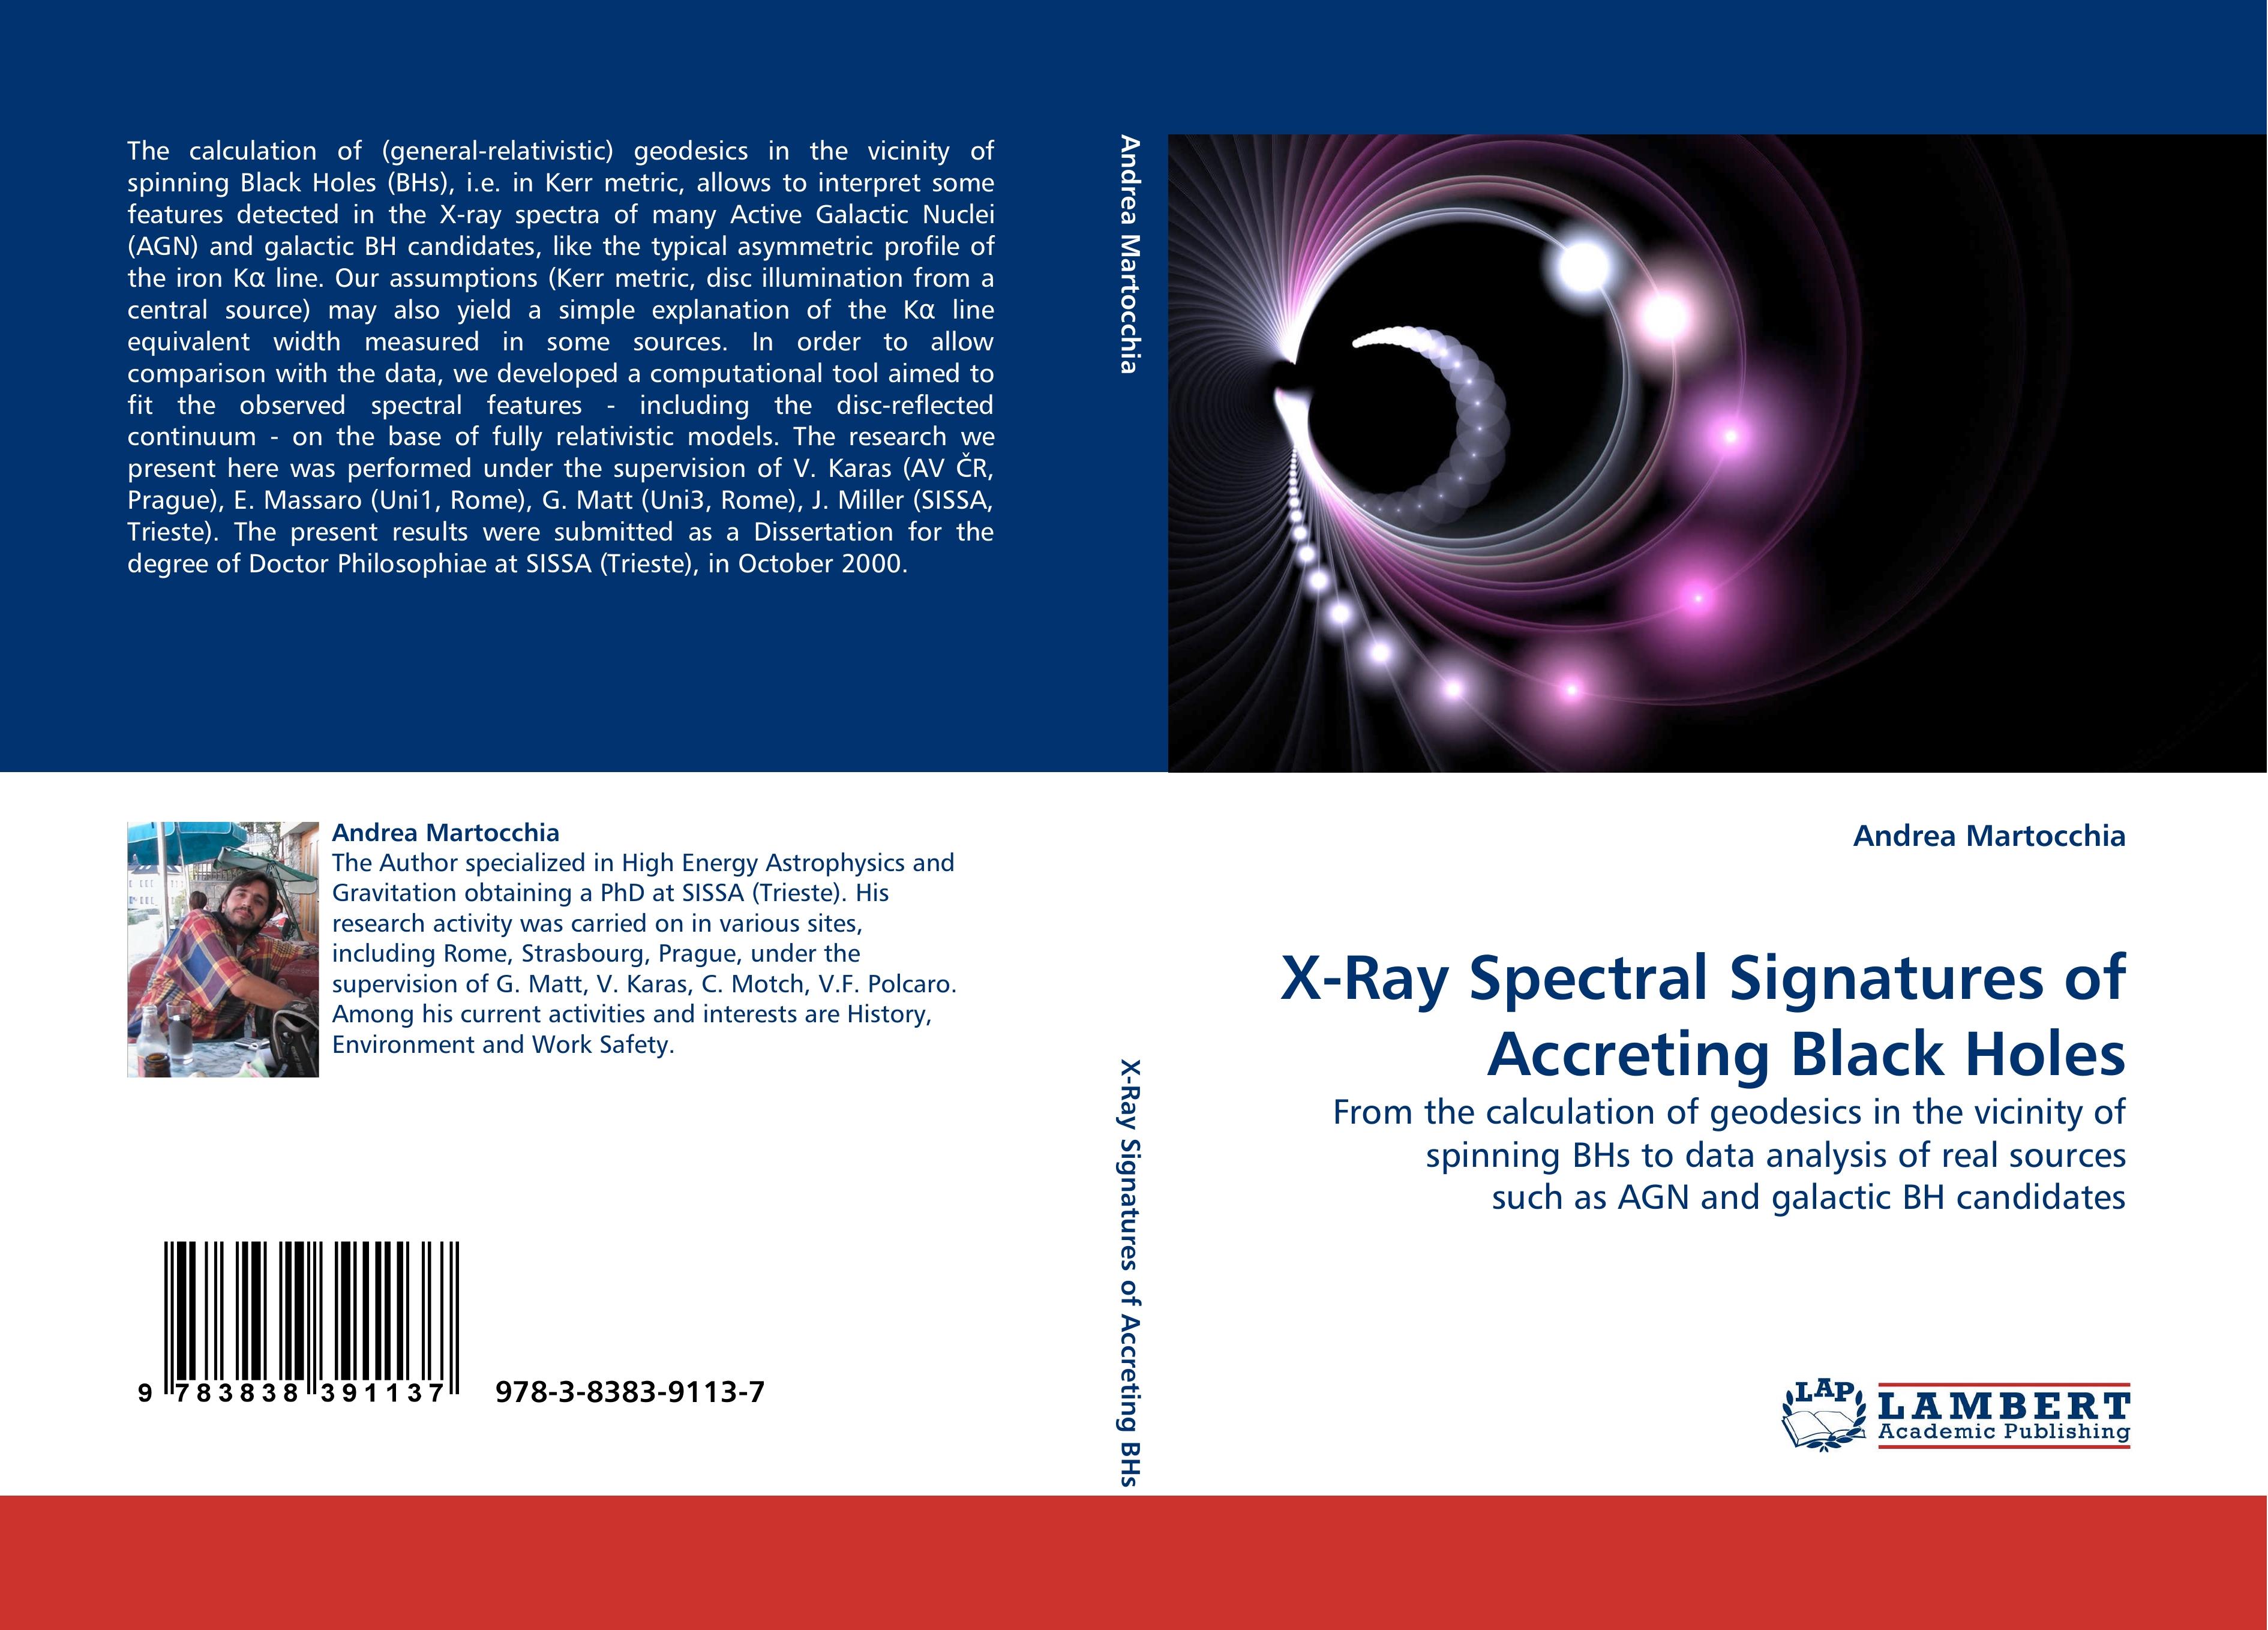 X-Ray Spectral Signatures of Accreting Black Holes - Andrea Martocchia